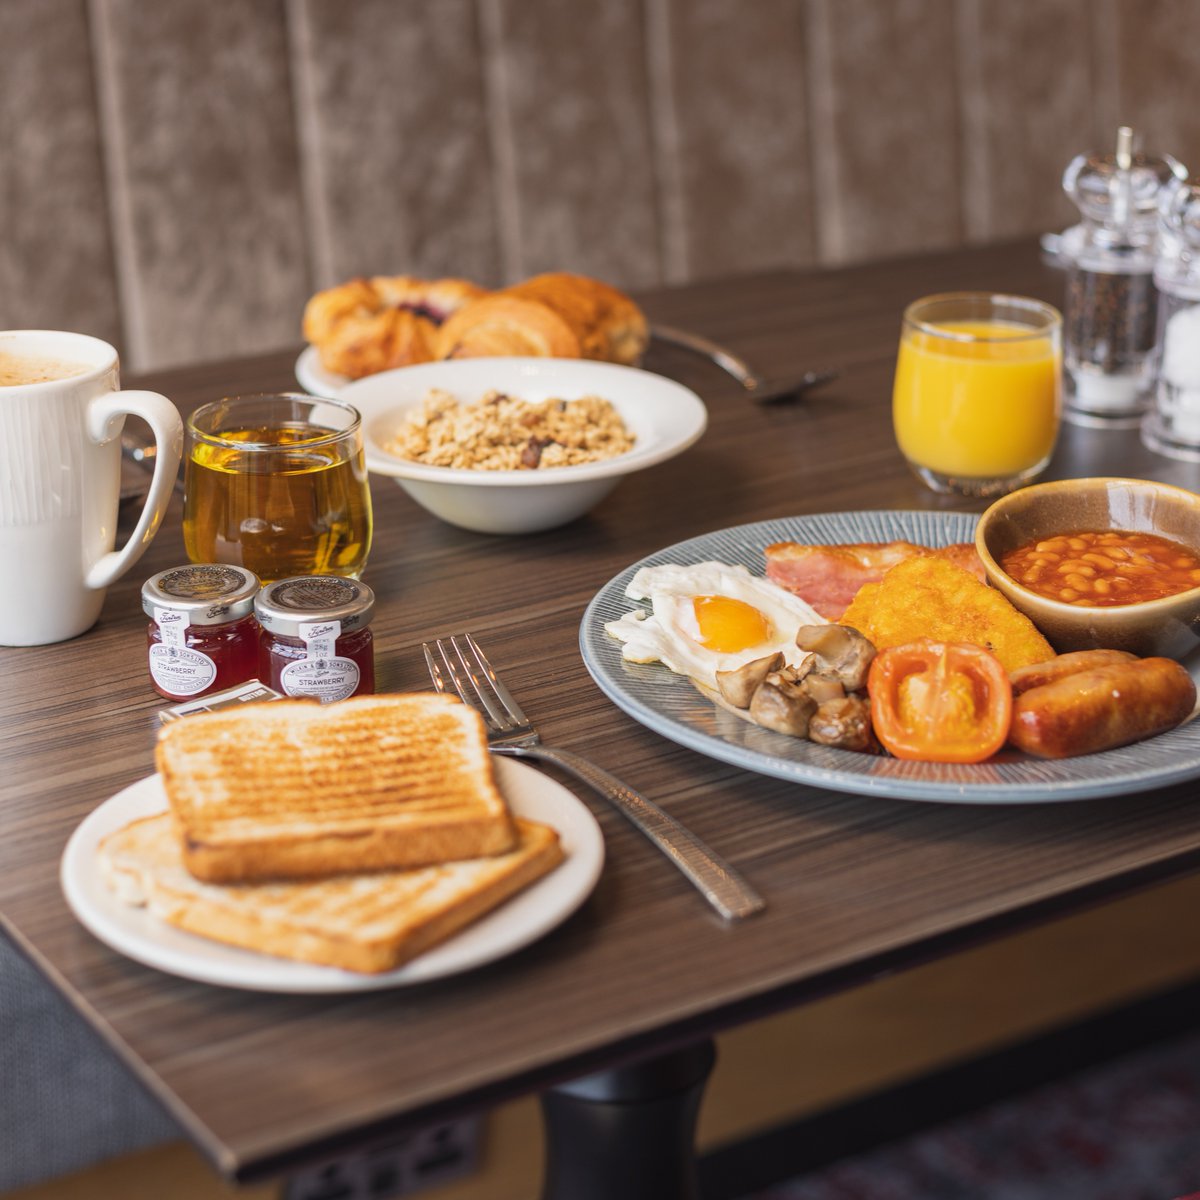 The most important meal of the day! 

#hgibhxairport #hiltongardeninn #hilton #castlebridgehospitality #birmingham #breakfast